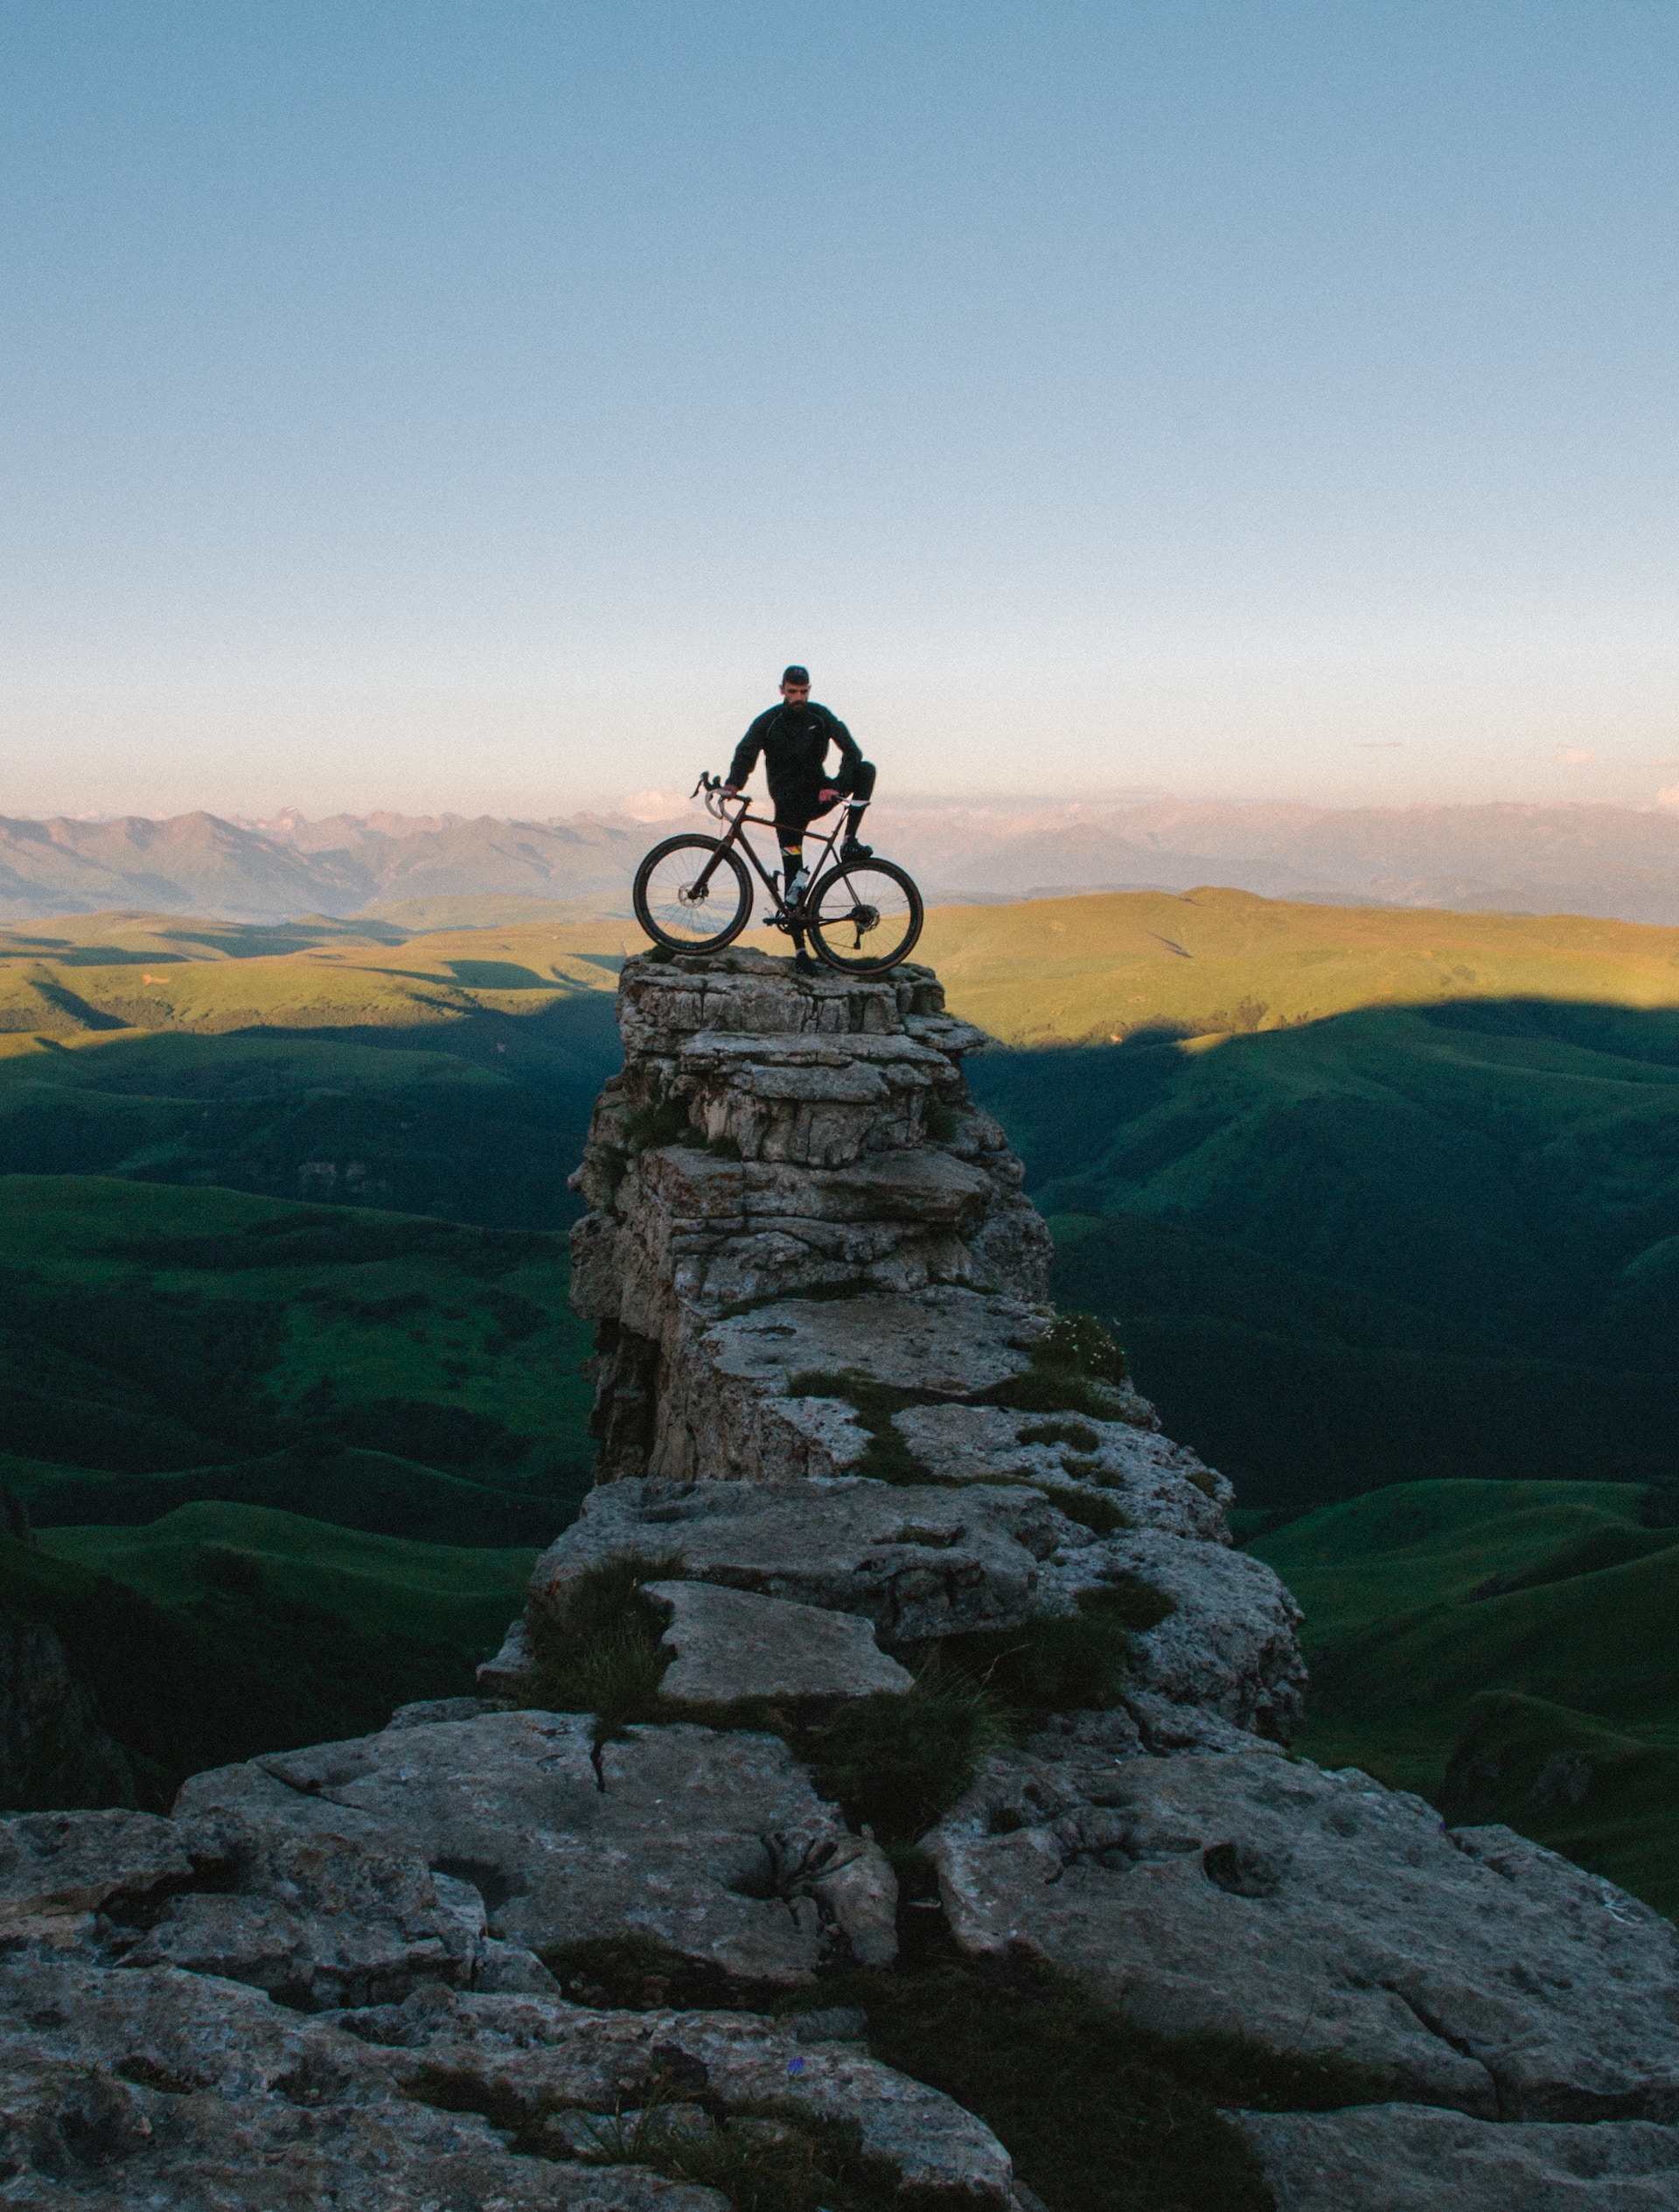 the image shows a male athlete standing on the cliff with a bicycle